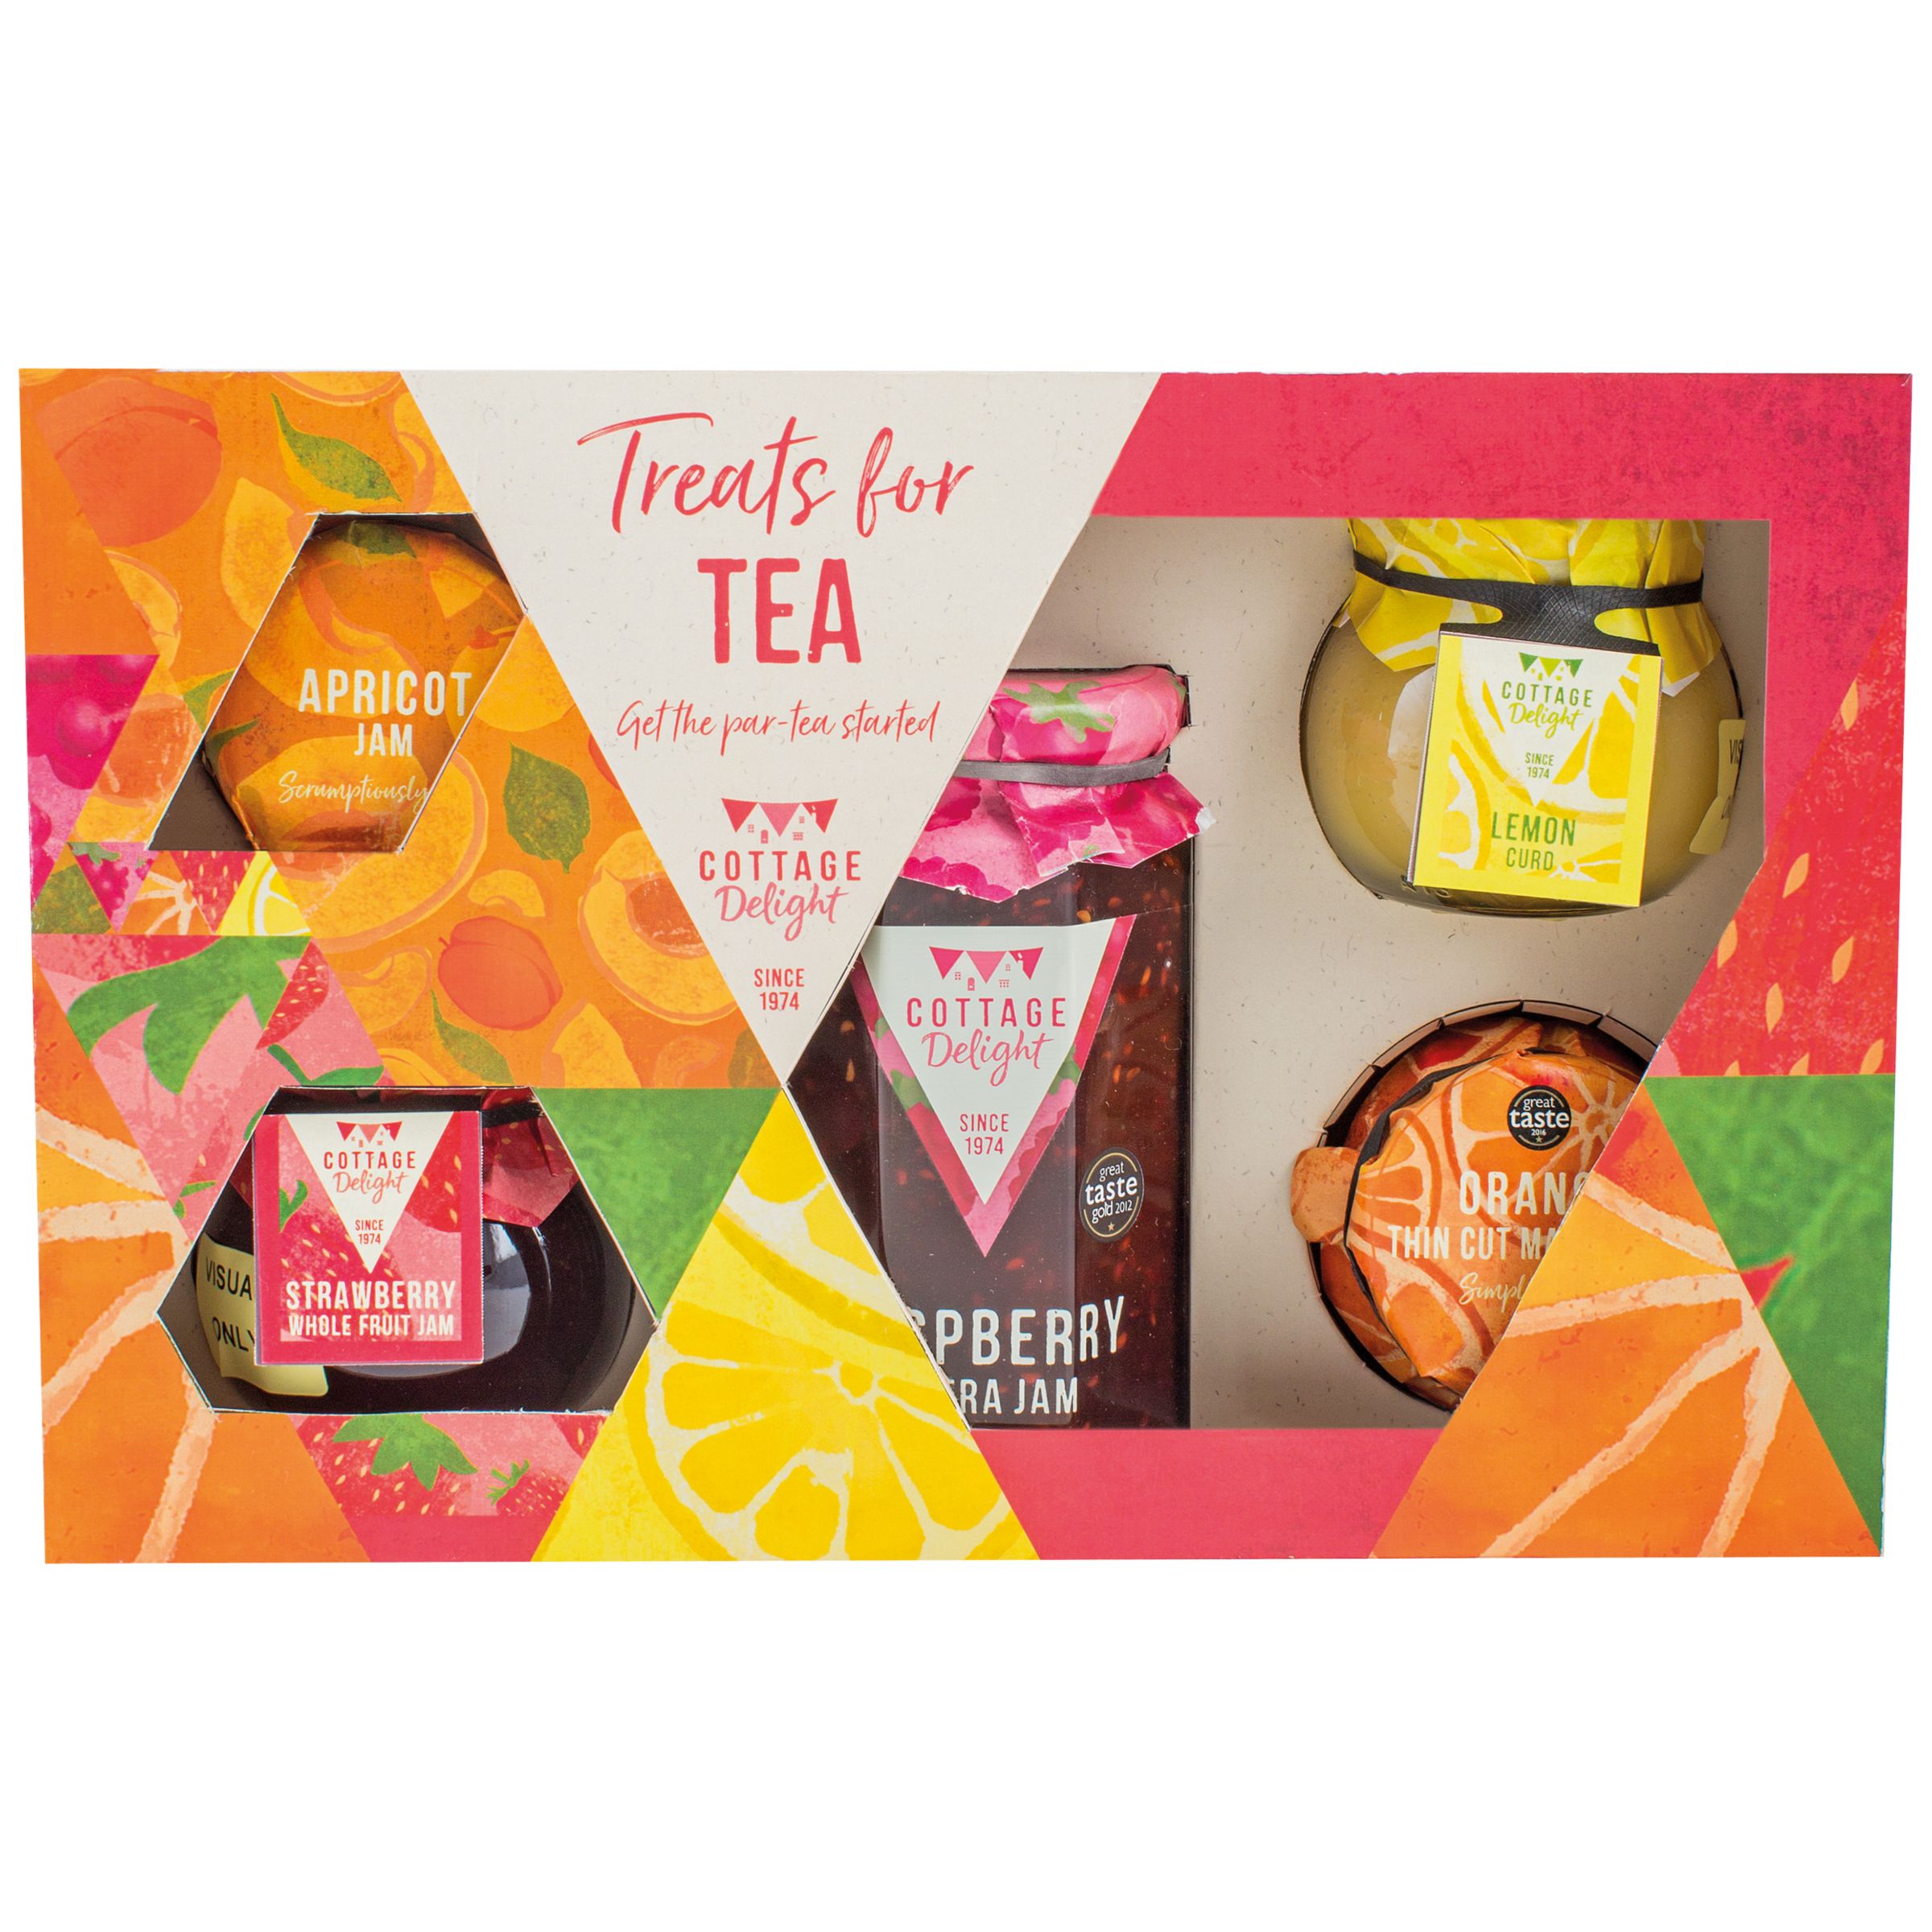 Cottage Delight Treats for Afternoon Tea, 792g